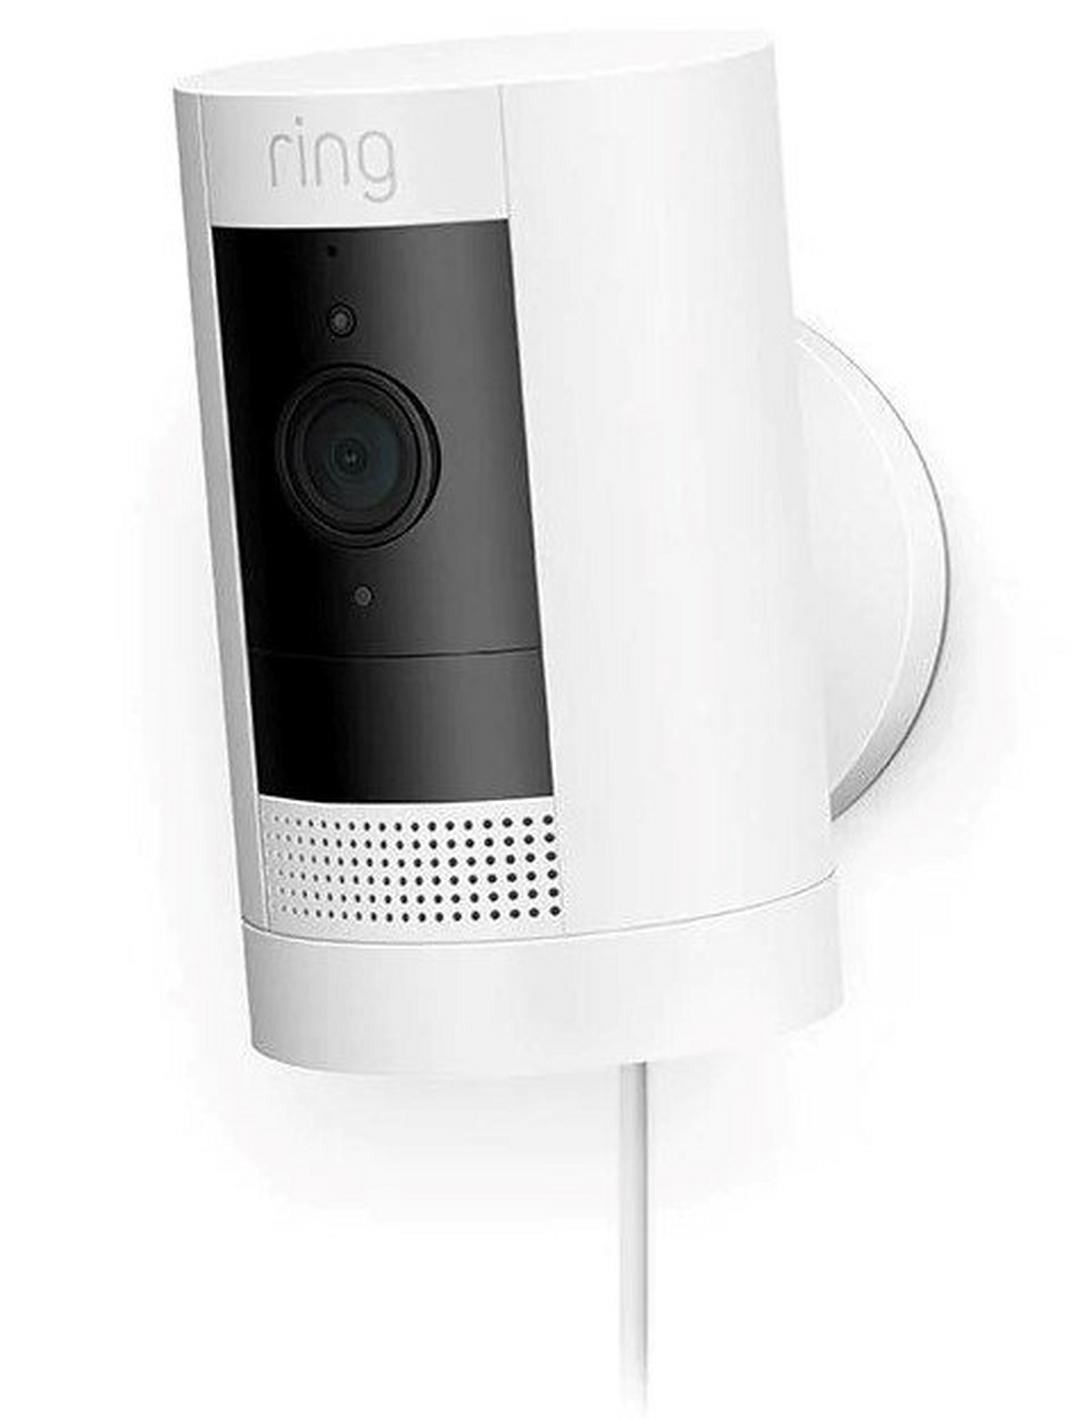 Ring Stick-Up Plug-In Cam - Smart Home Security Camera White - White